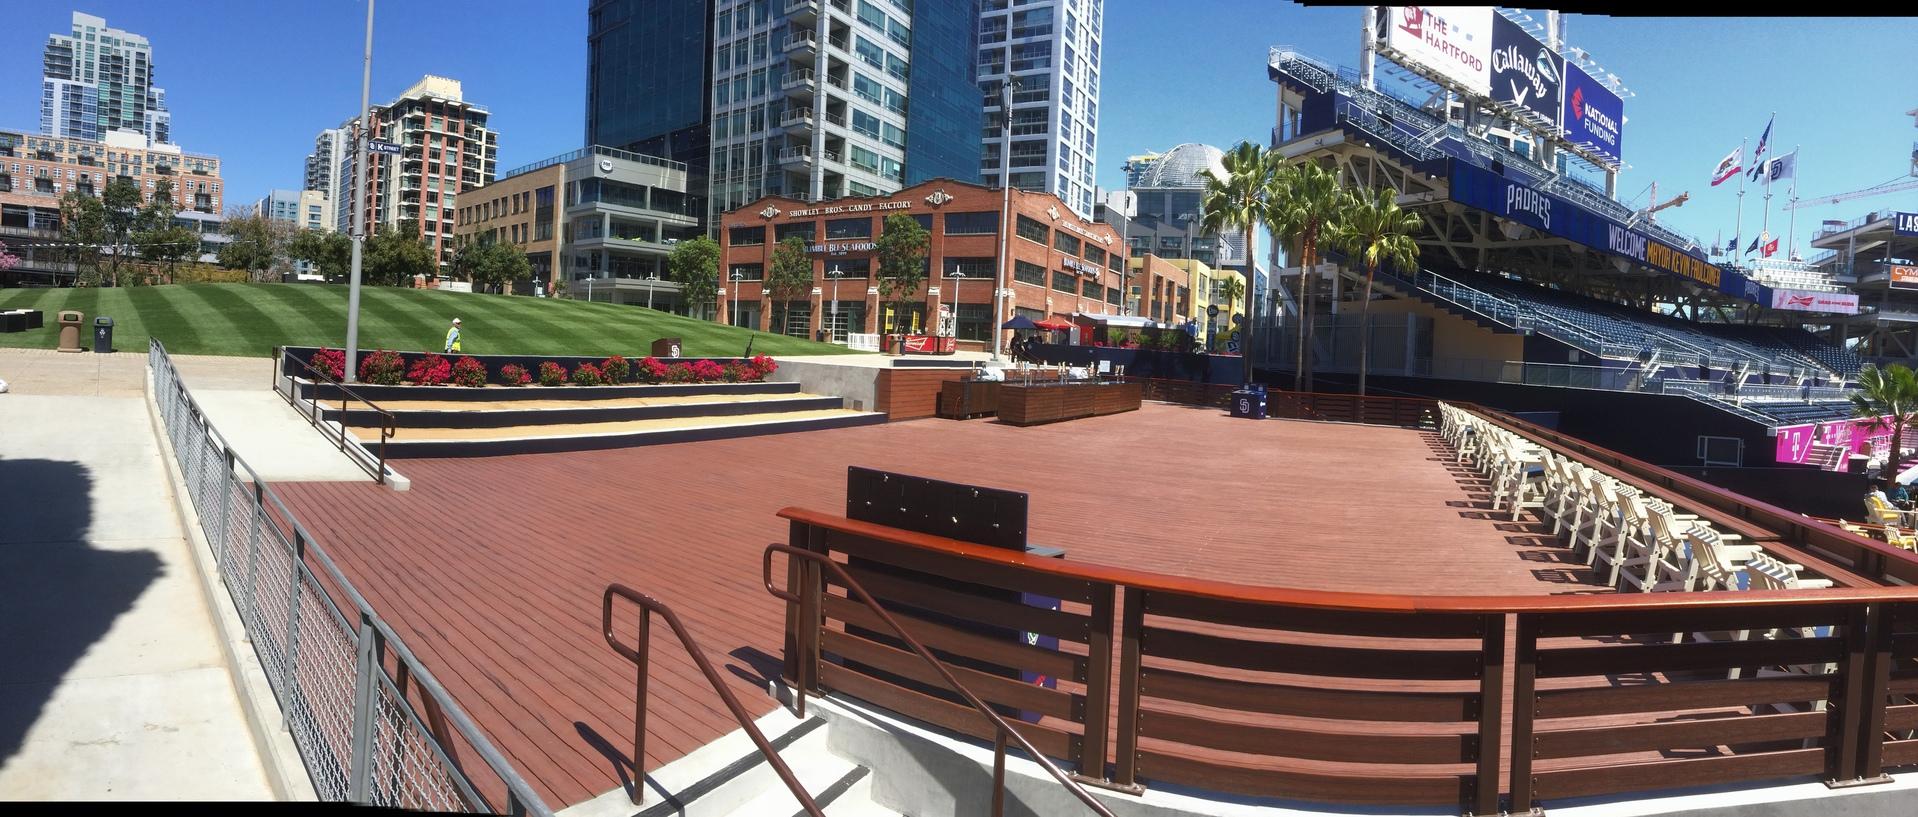 Petco Park, Projects